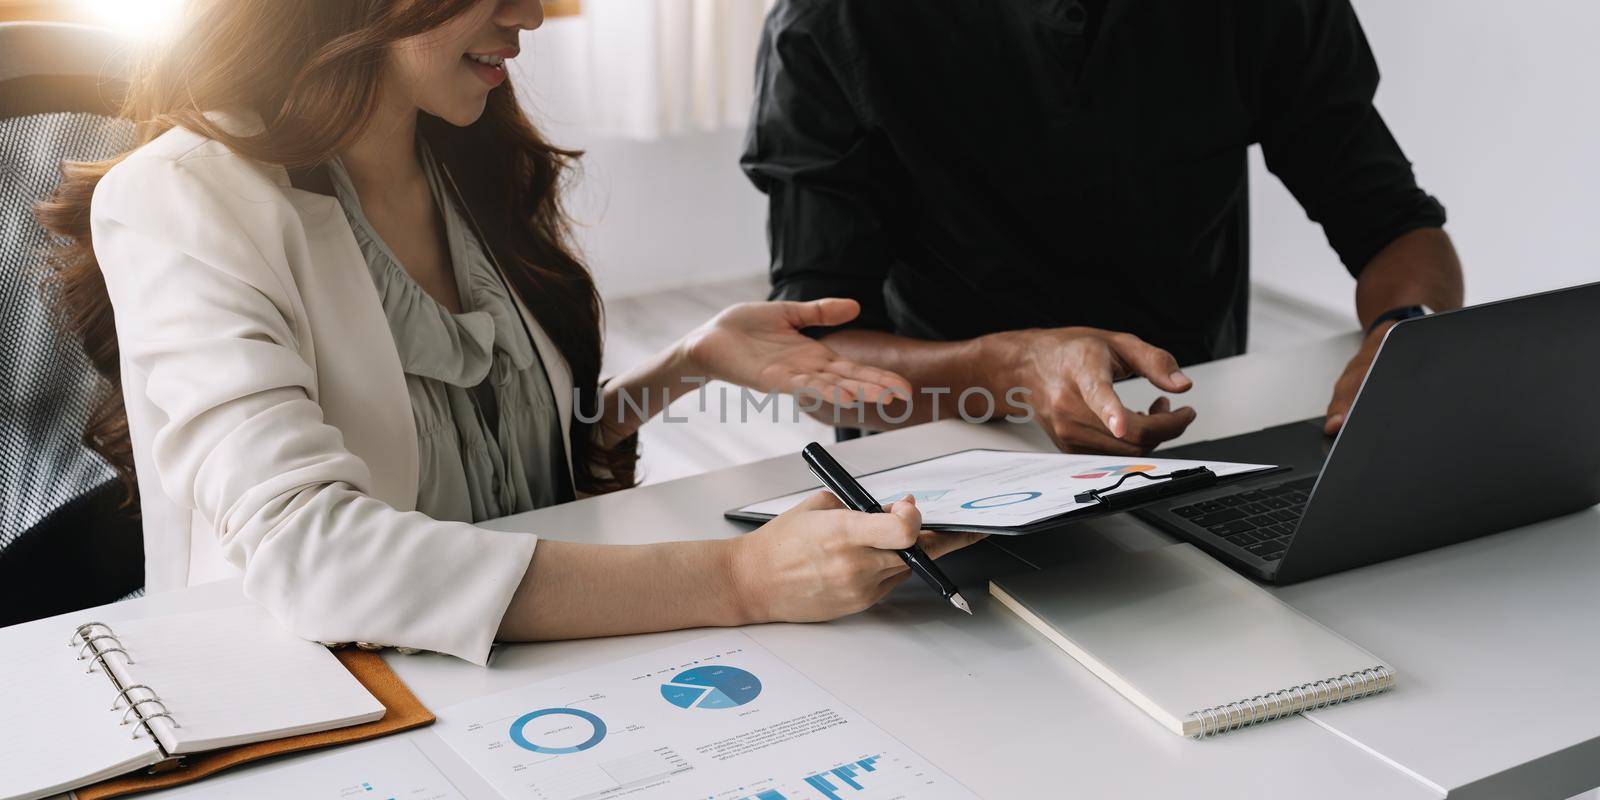 Business team finance or bookkeeper working with a calculator to calculate business data summary report, accountancy document and laptop computer at the office, business meeting concept by nateemee